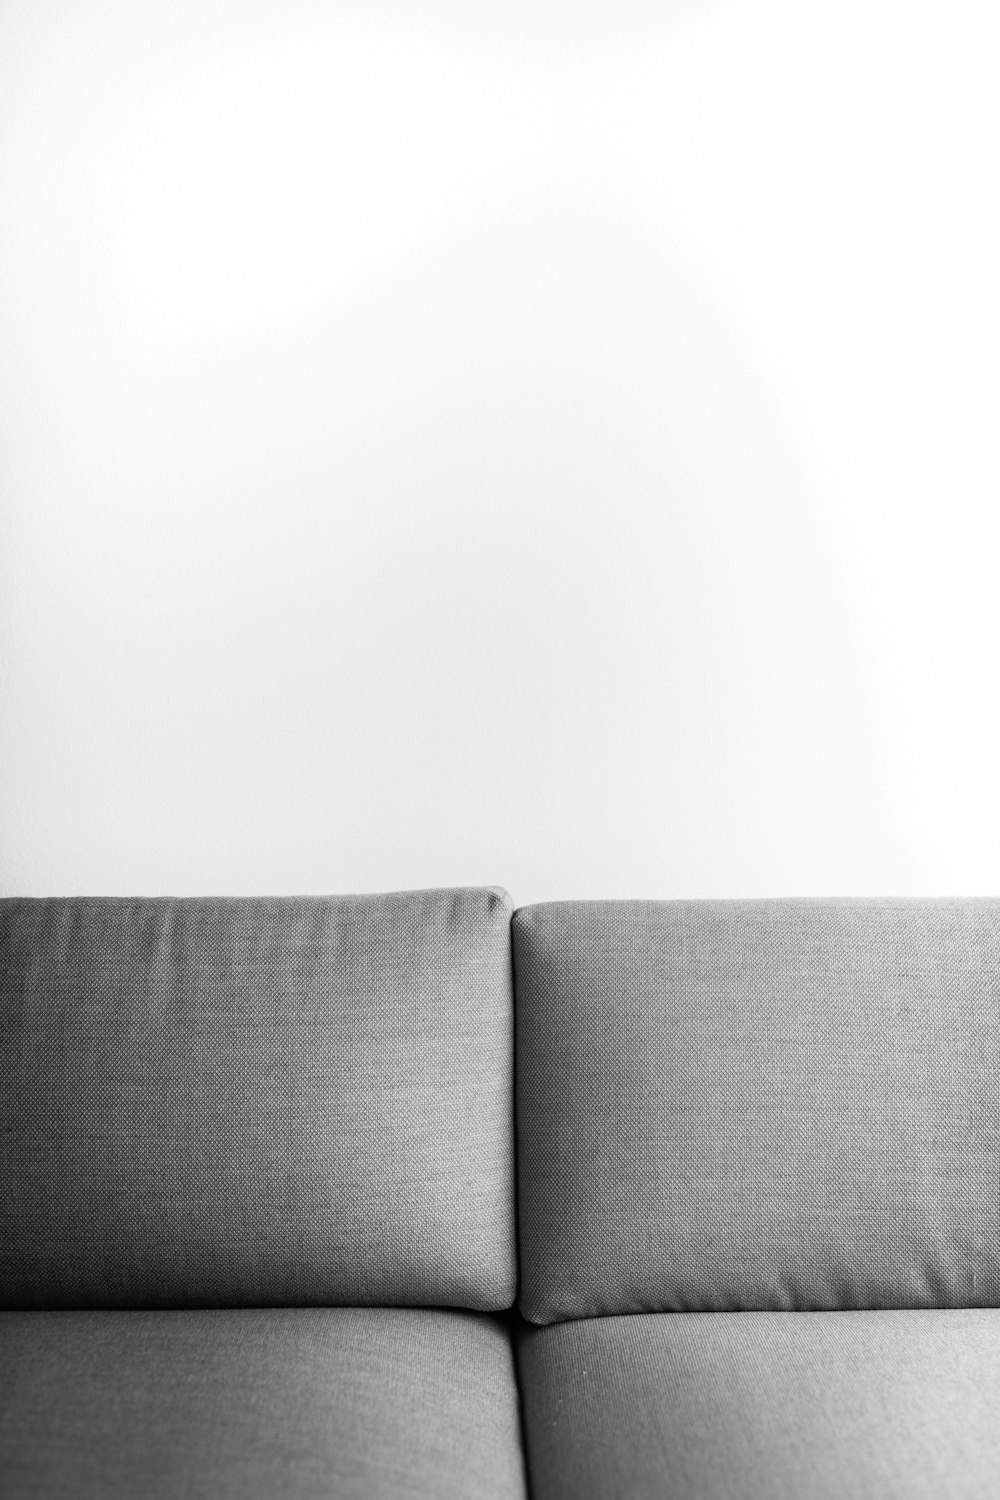 gray cushion couch beside white wall